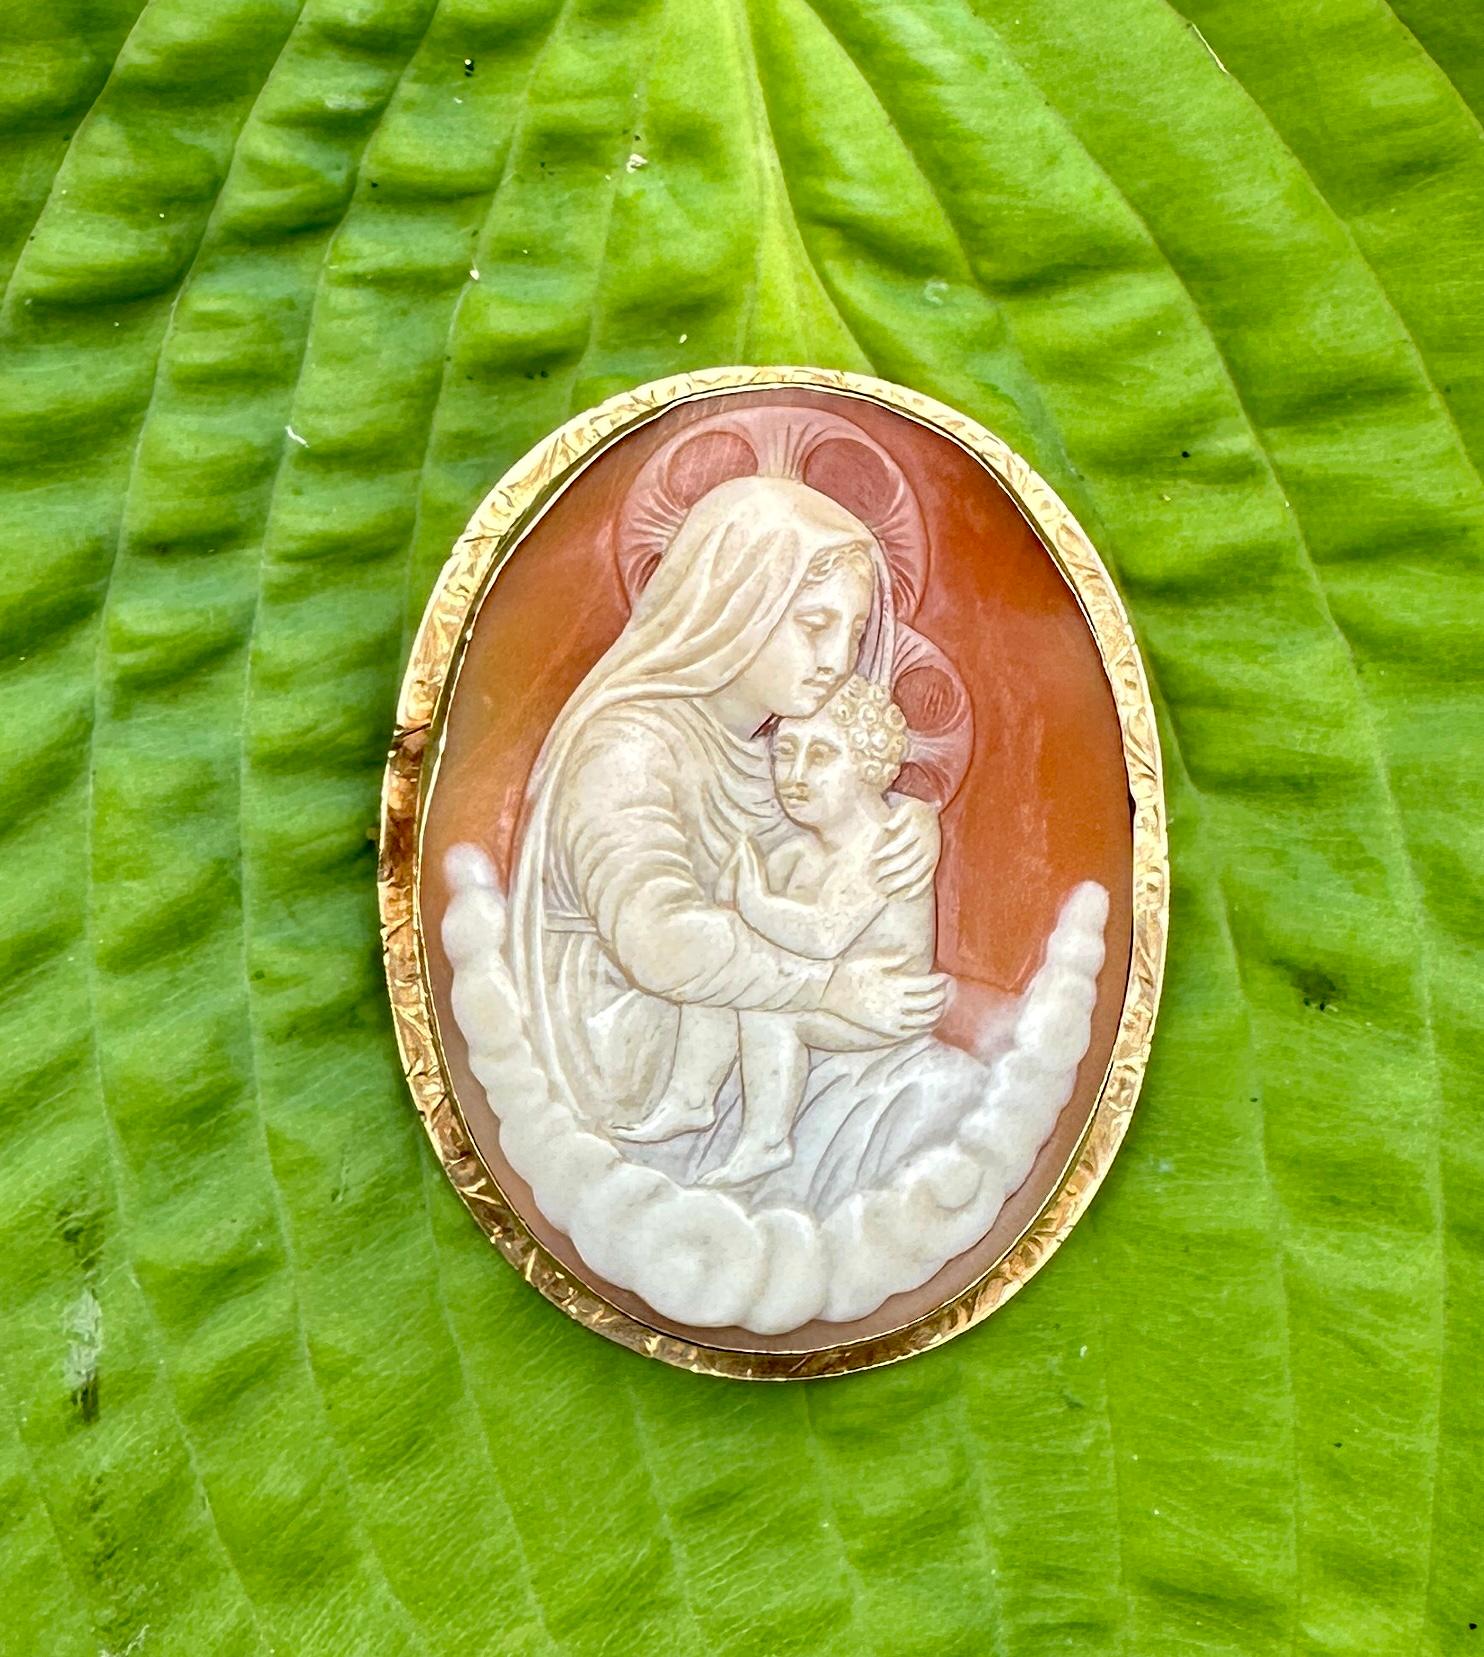 This is an absolutely stunning and very rare early antique Victorian - Belle Epoque Shell Cameo Pendant Brooch Pin with an exquisite museum quality hand carved image of the Madonna with Child set in a gorgeous engraved 14 Karat Yellow Gold frame.  